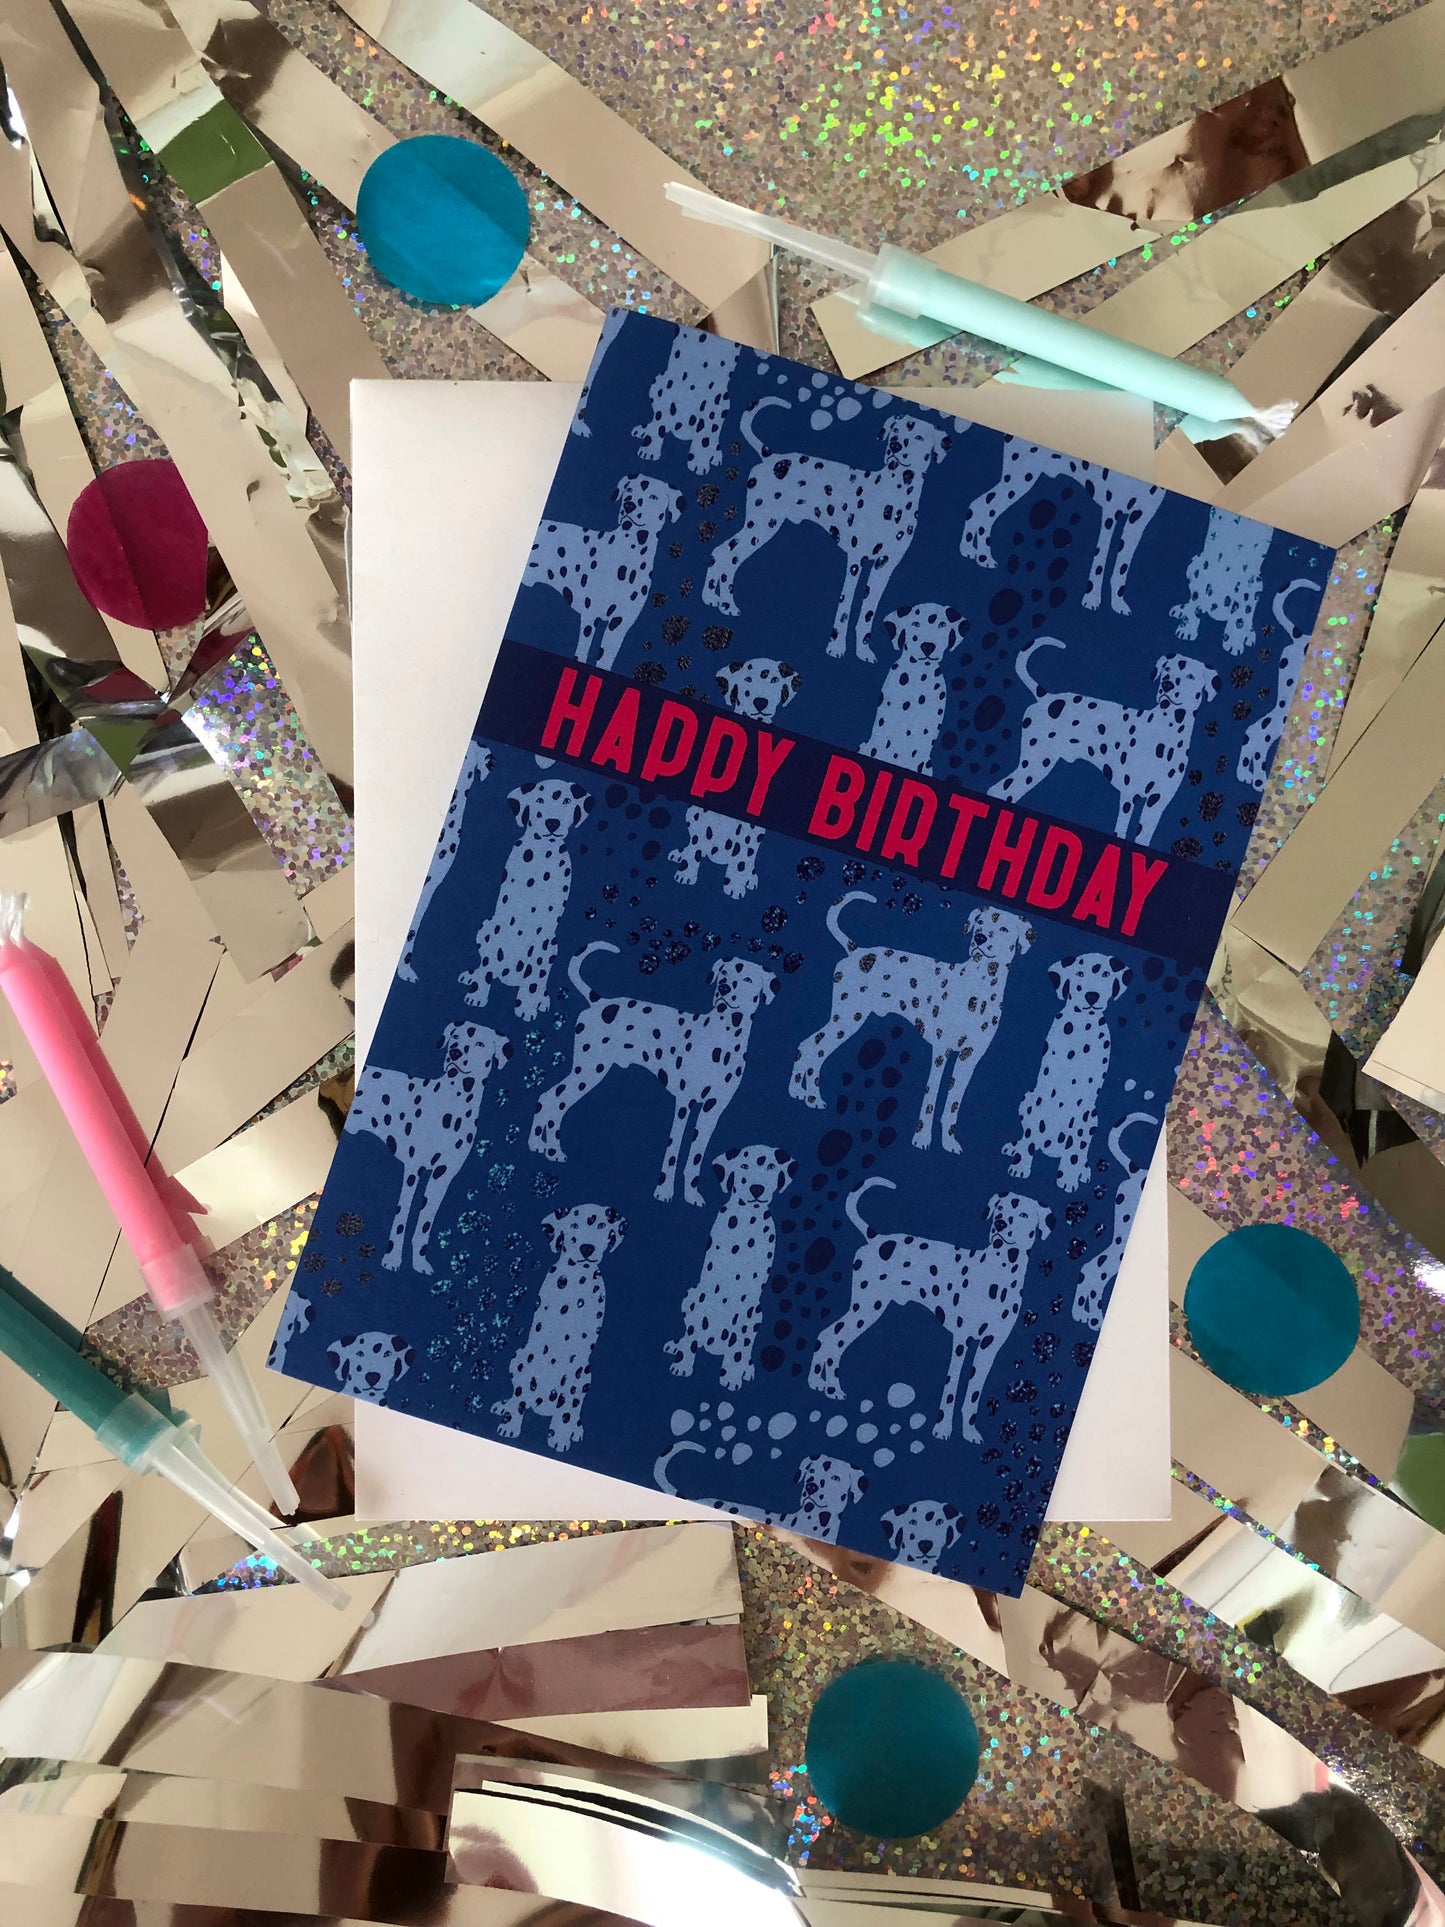 Blue Dalmatian print birthday card featuring a cute dog design on a holographic and silver background.